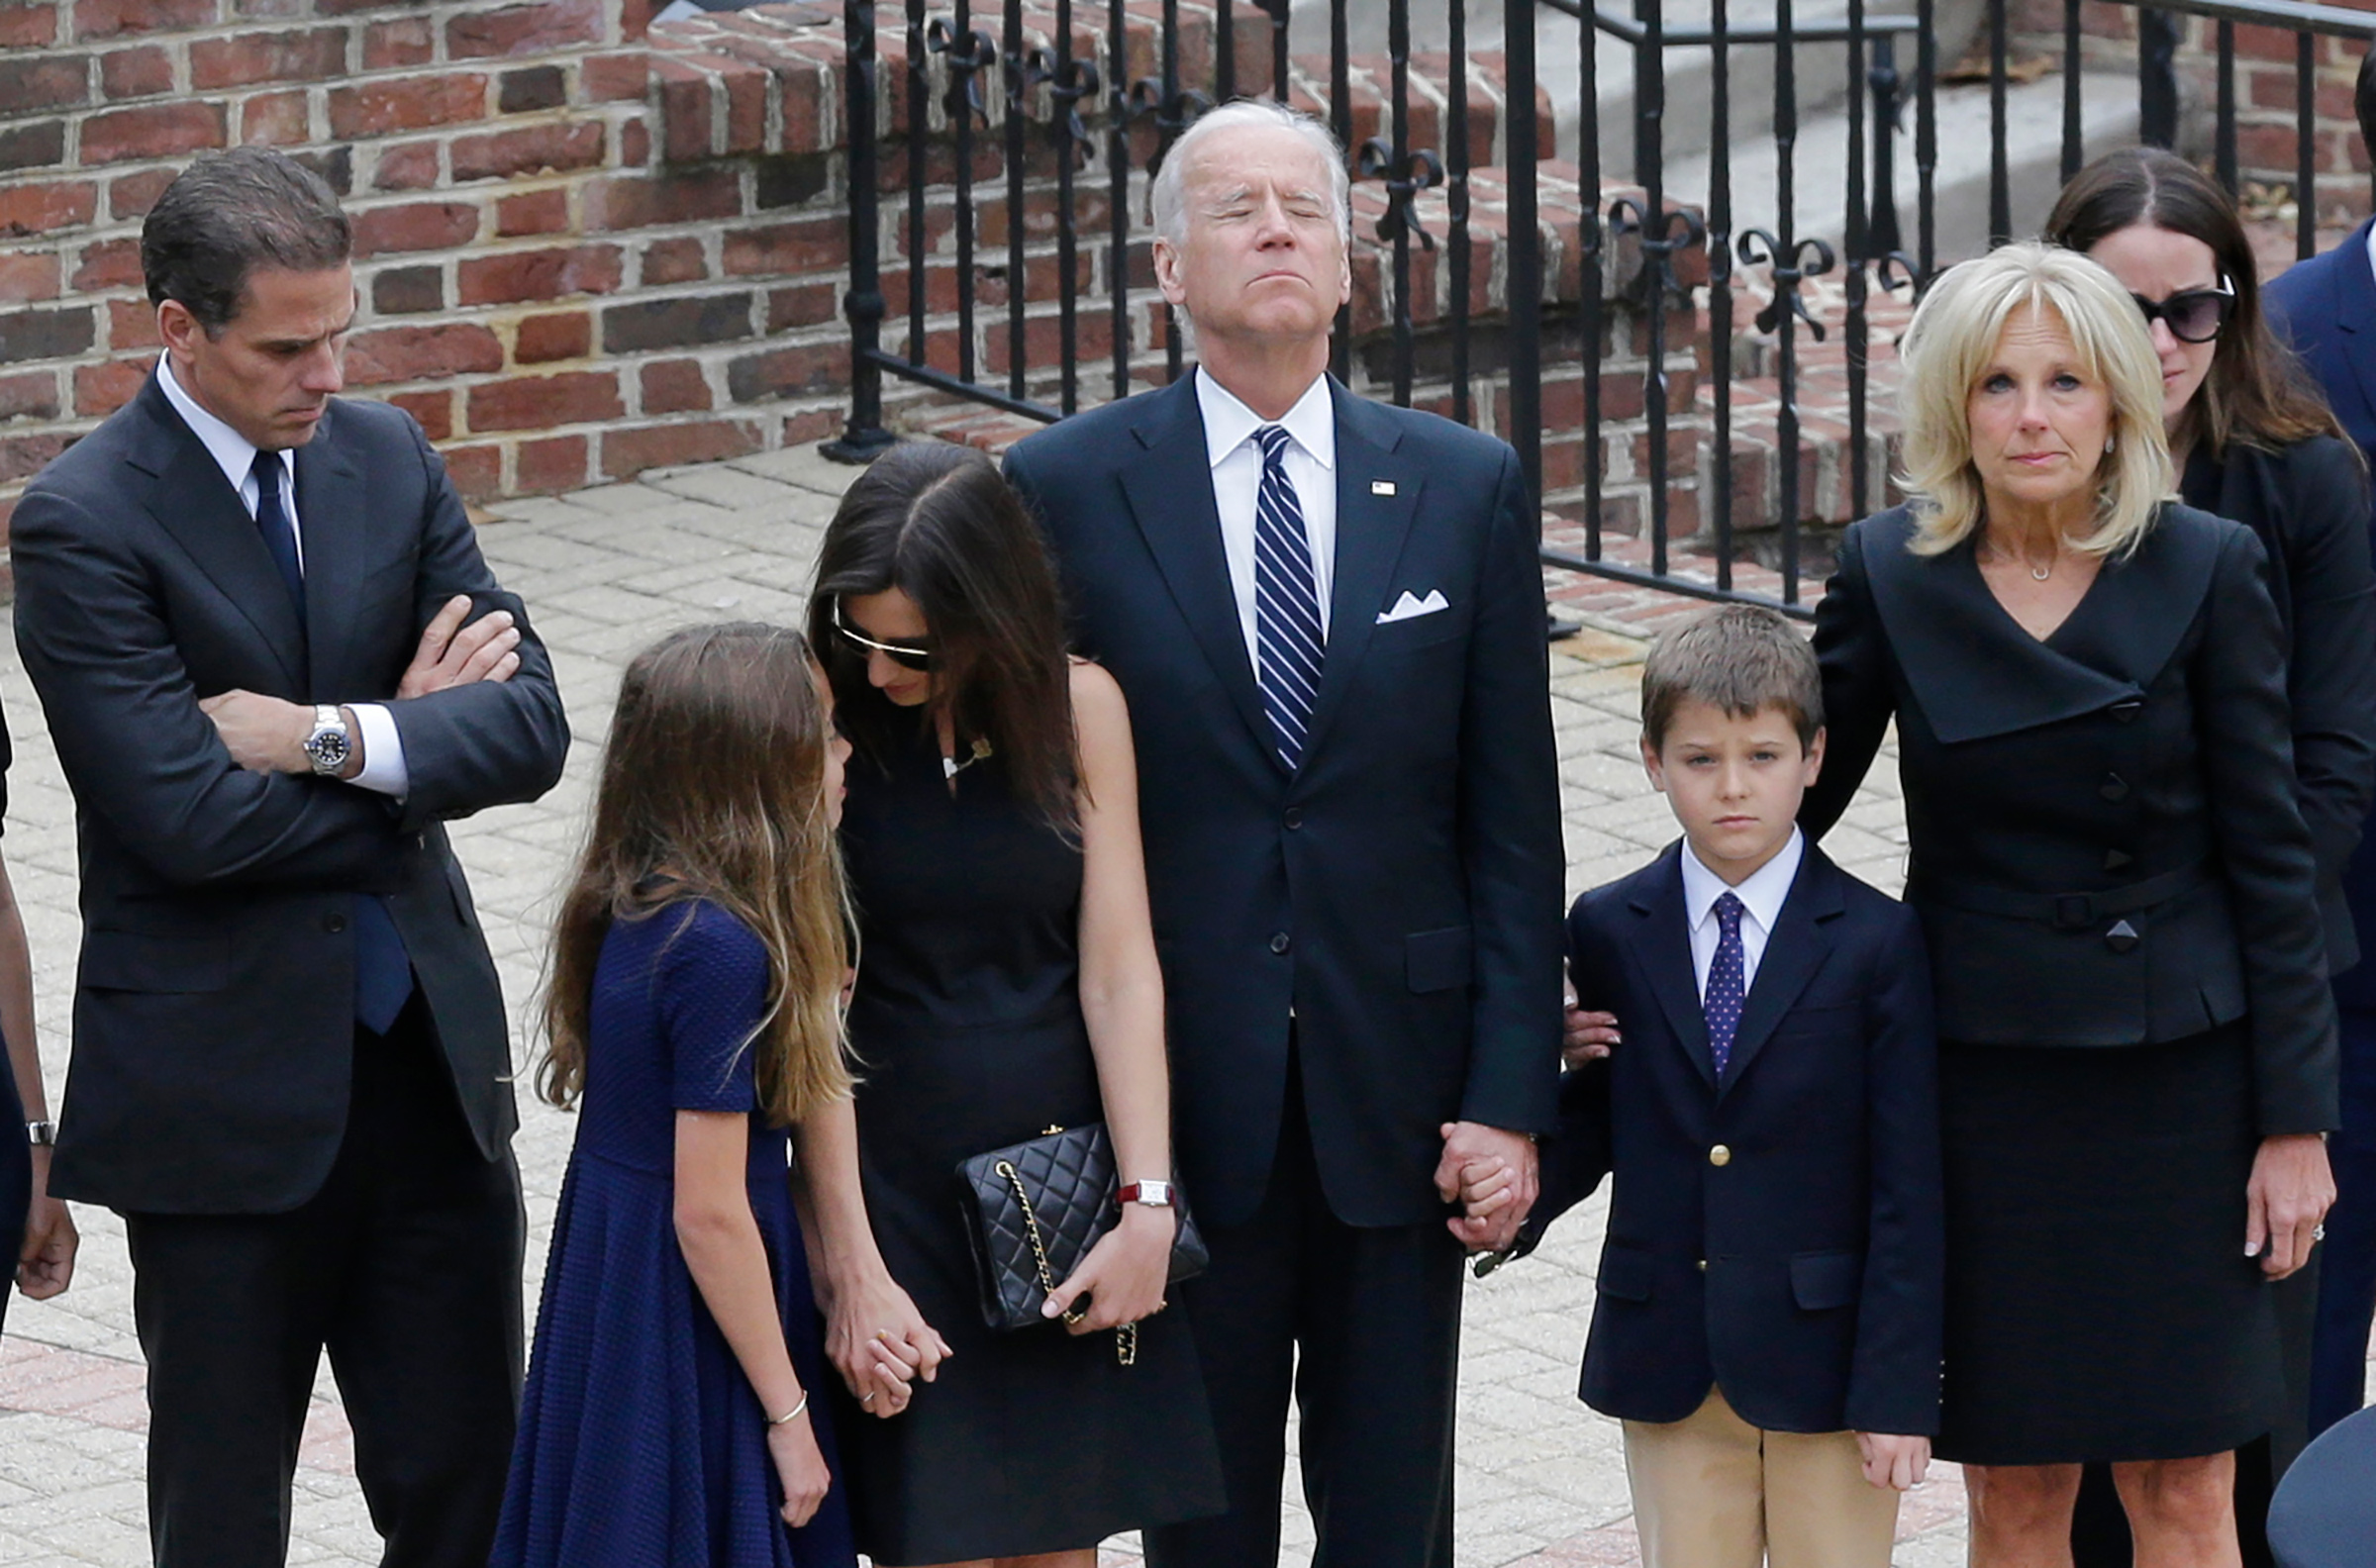 Biden and his family at a visitation for his son Beau in 2015 (AP)